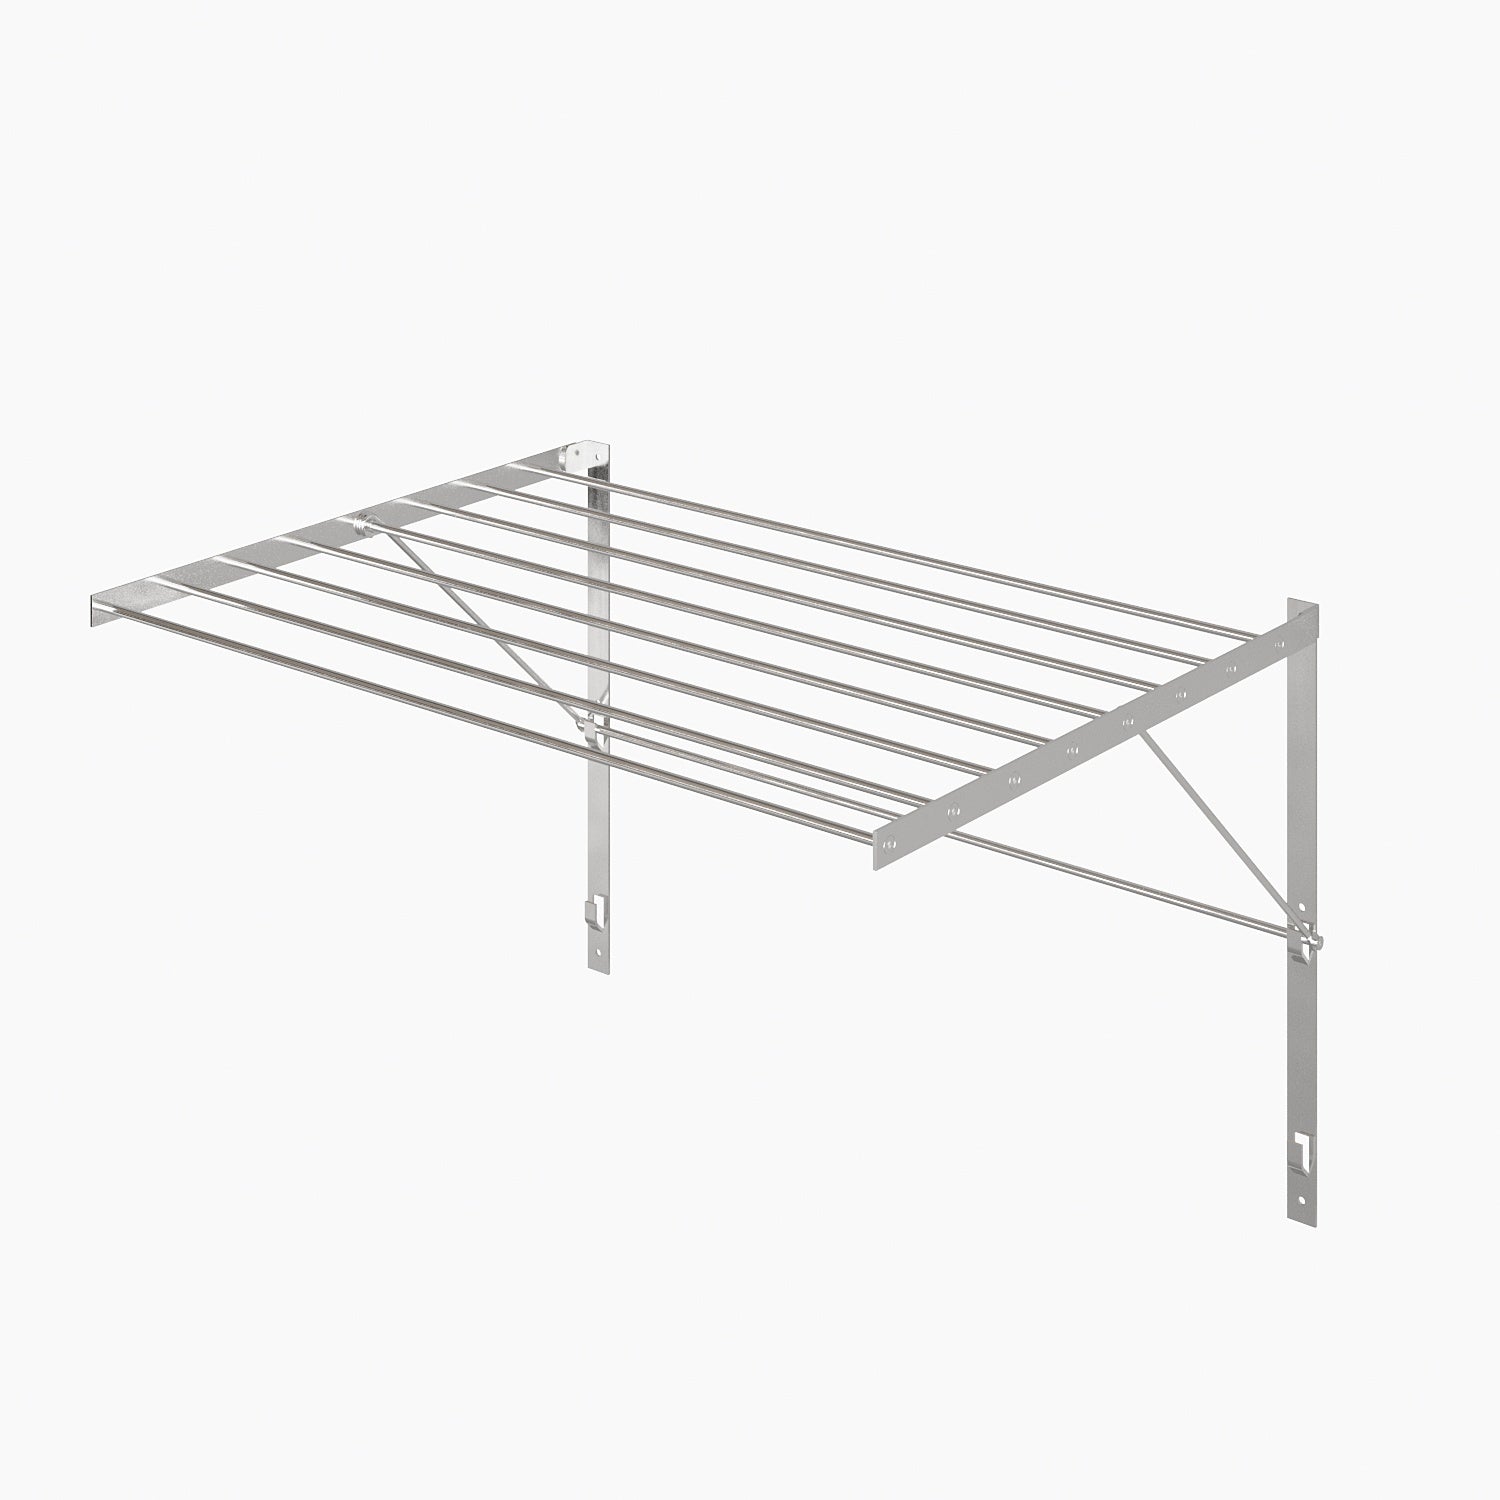 brightmaison Wall Mount Clothes Drying Rack & Laundry Room Organizer, 6.5  Yards Drying Capacity Stainless Steel Silver Laundry Rack